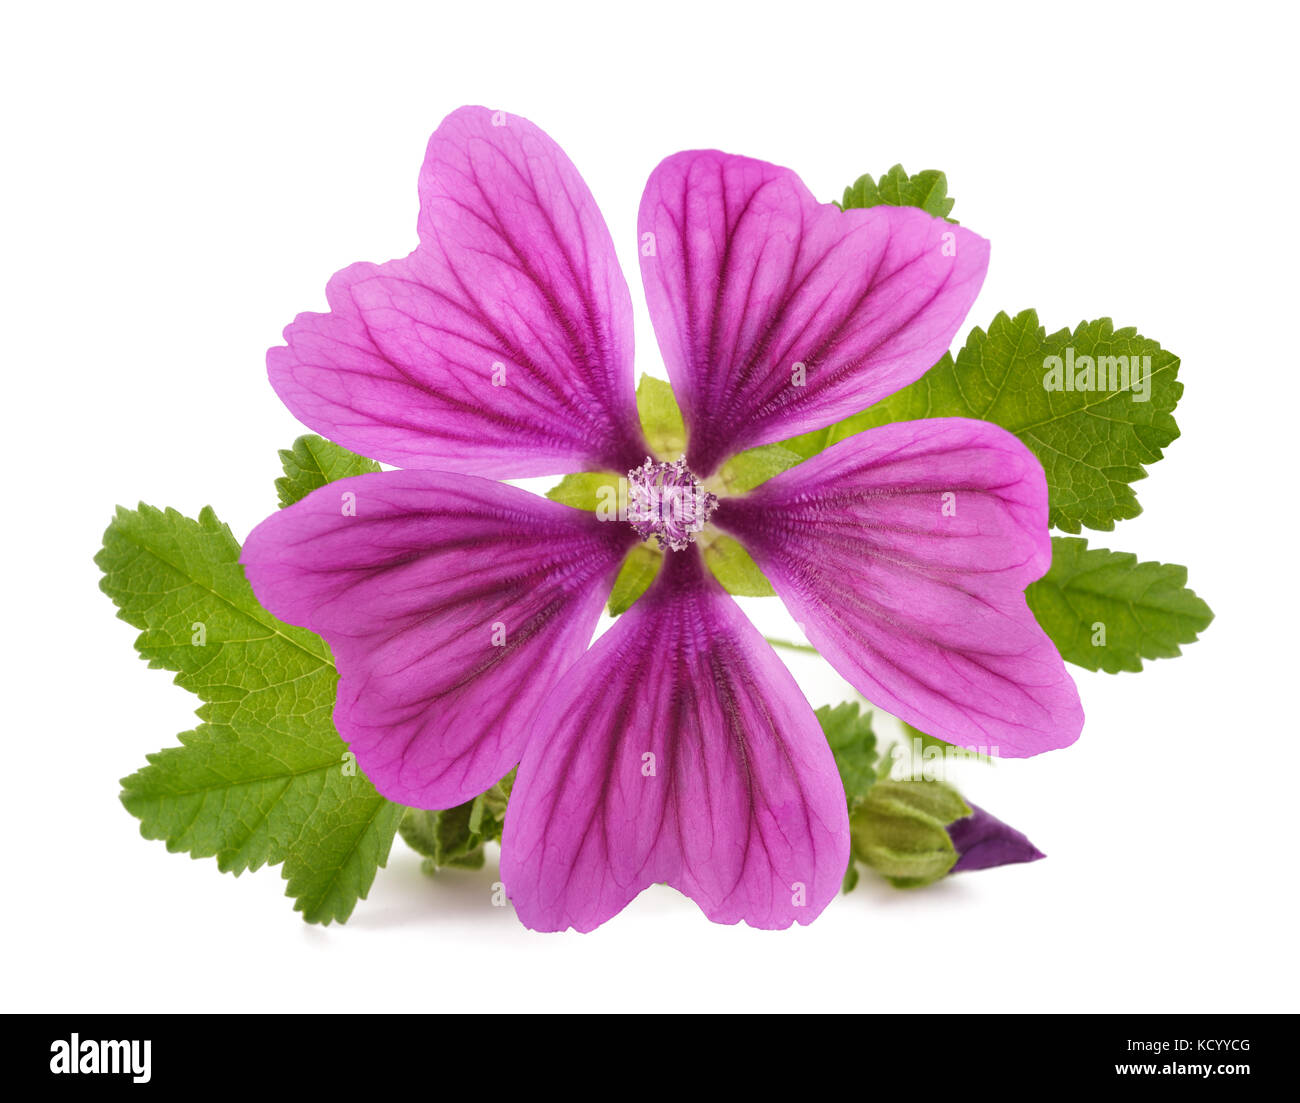 Mallow plante avec flower isolated on white background Banque D'Images